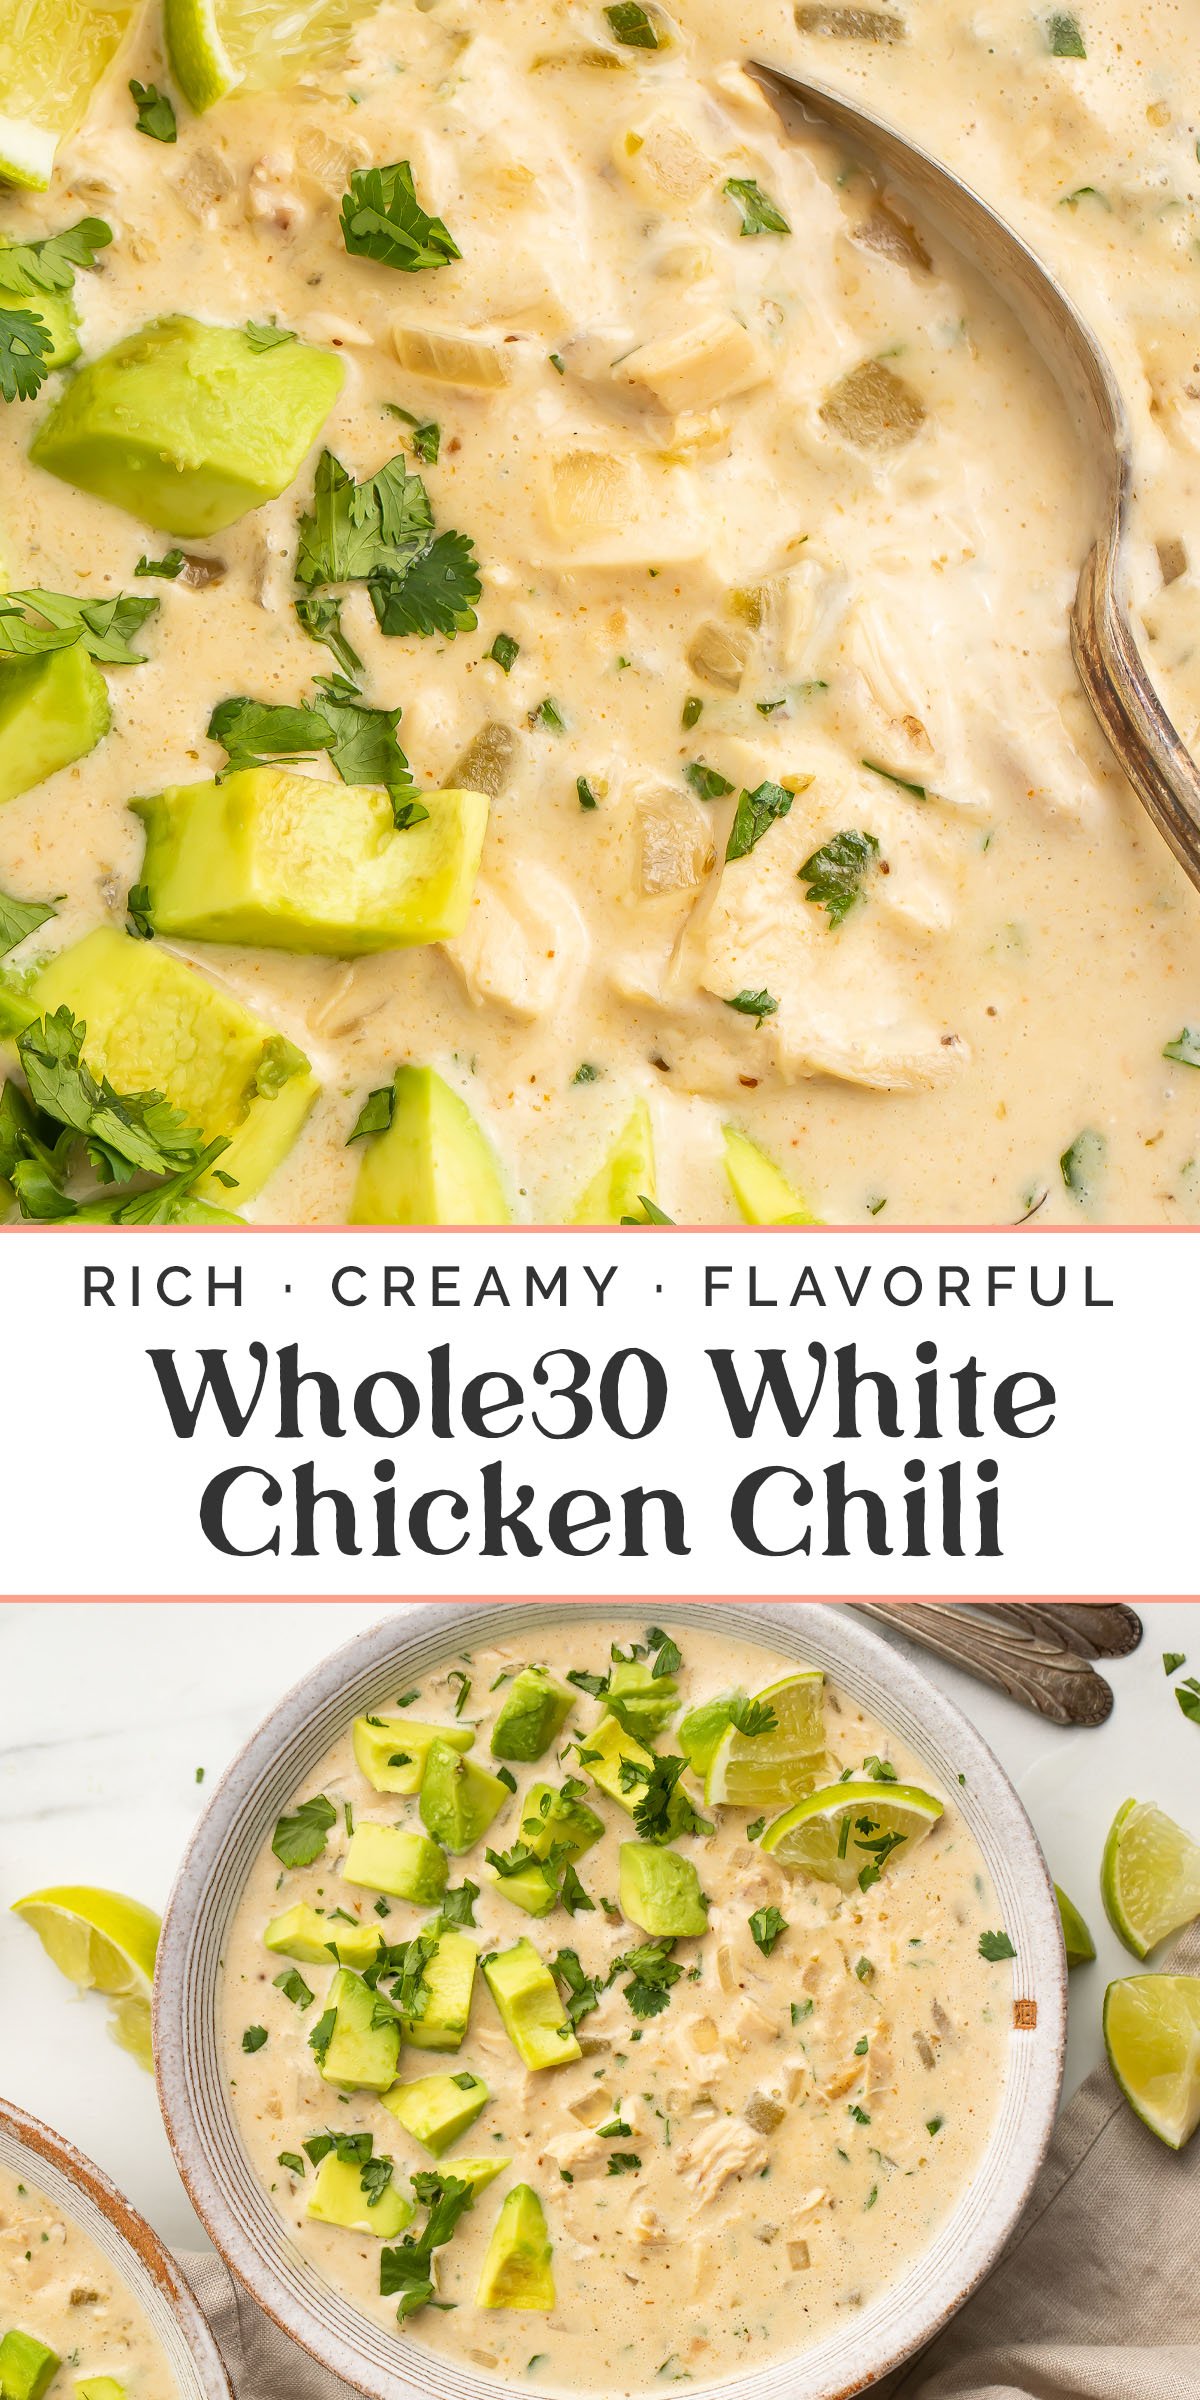 Pin graphic for Whole30 white chicken chili.